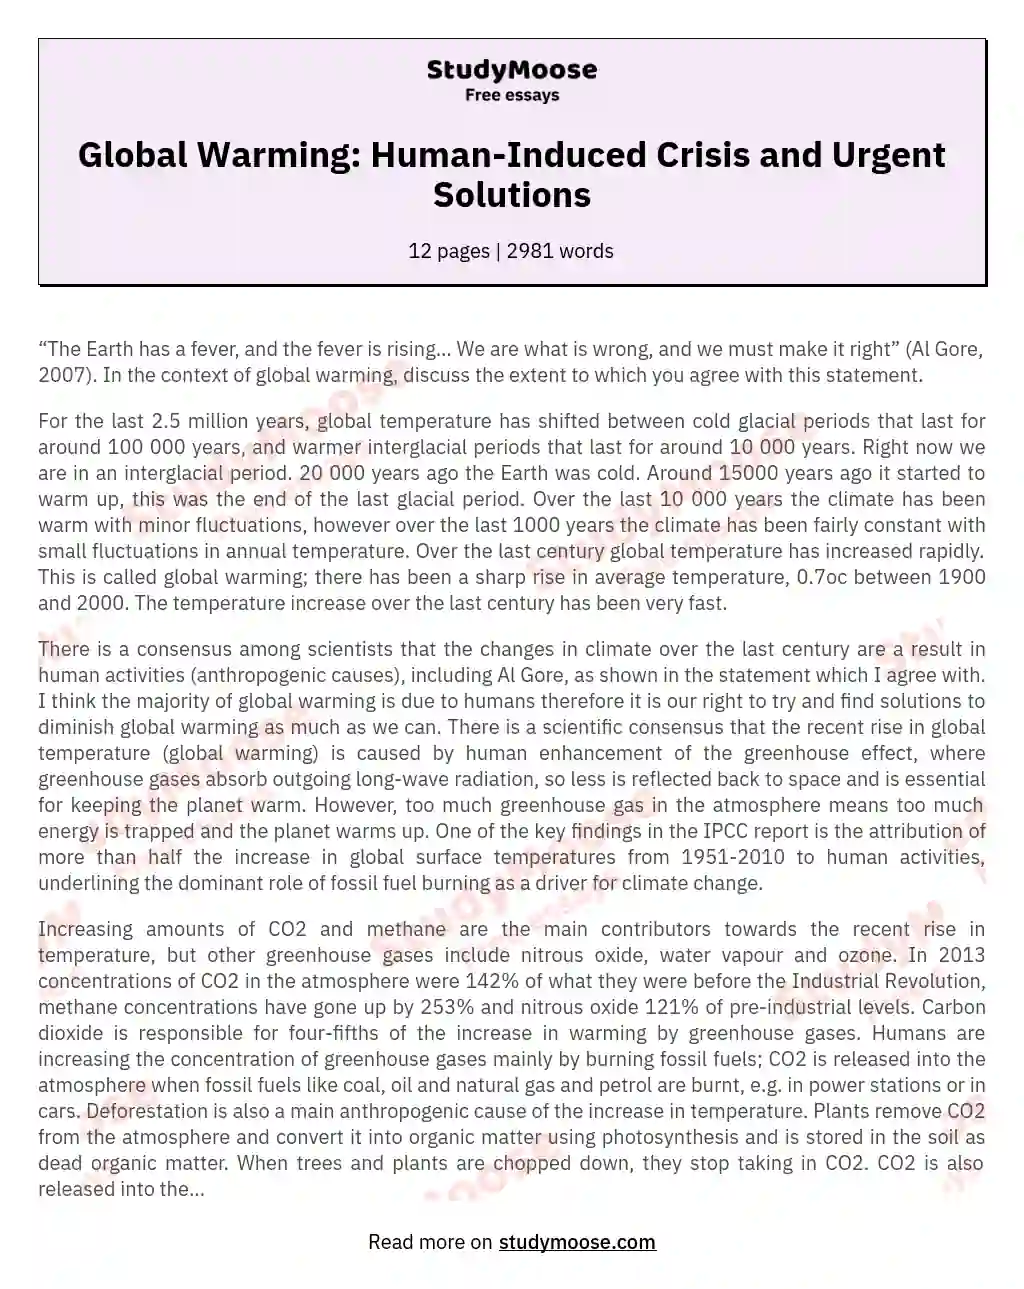 Global Warming: Human-Induced Crisis and Urgent Solutions essay